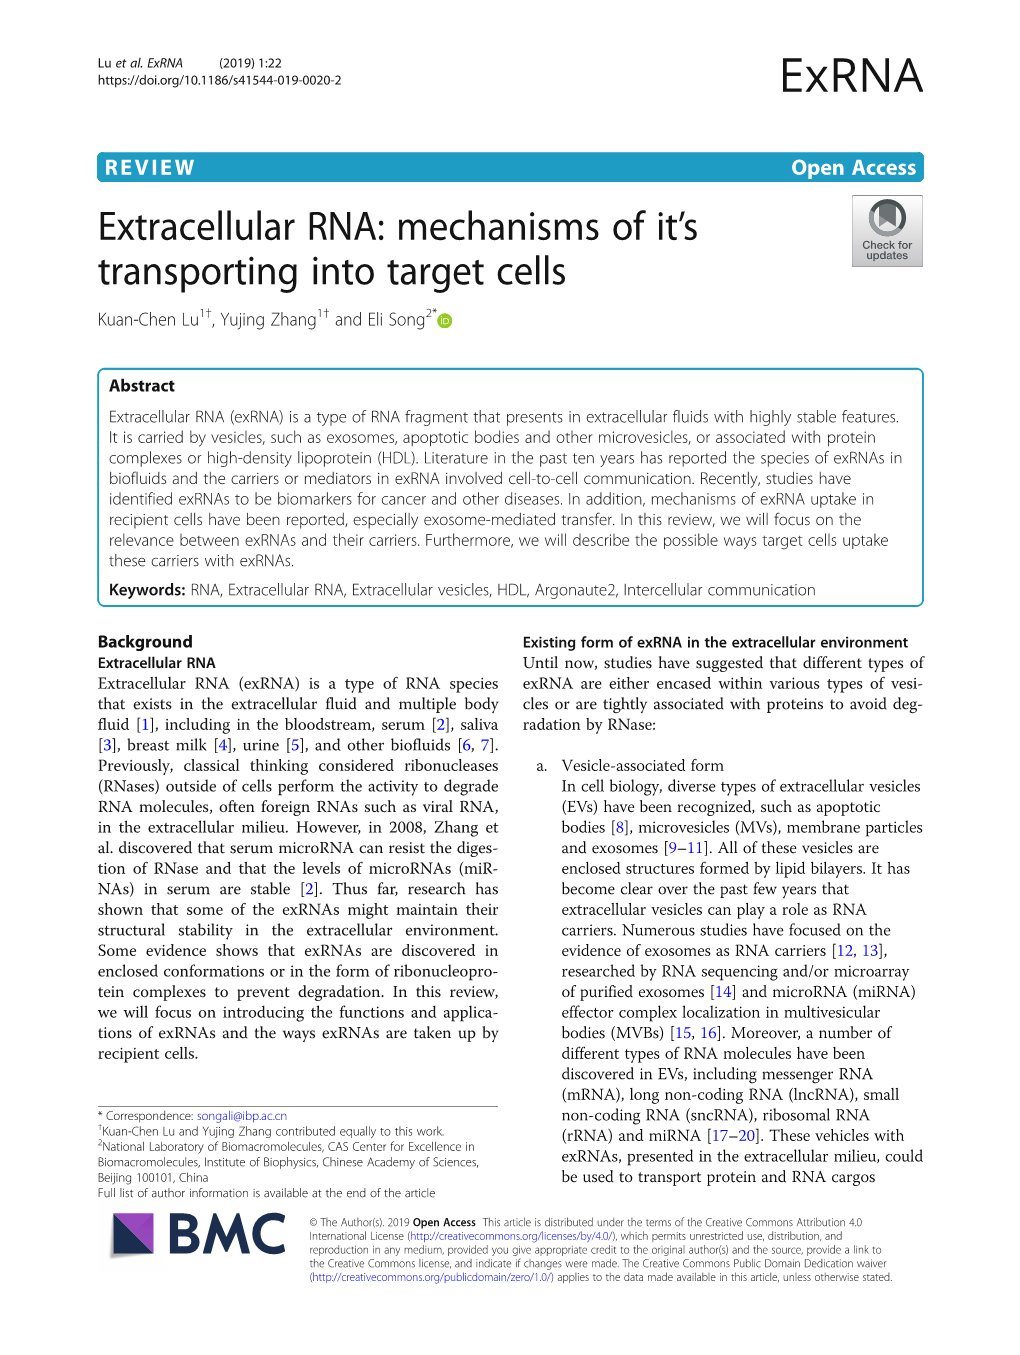 Extracellular RNA: Mechanisms of It’S Transporting Into Target Cells Kuan-Chen Lu1†, Yujing Zhang1† and Eli Song2*